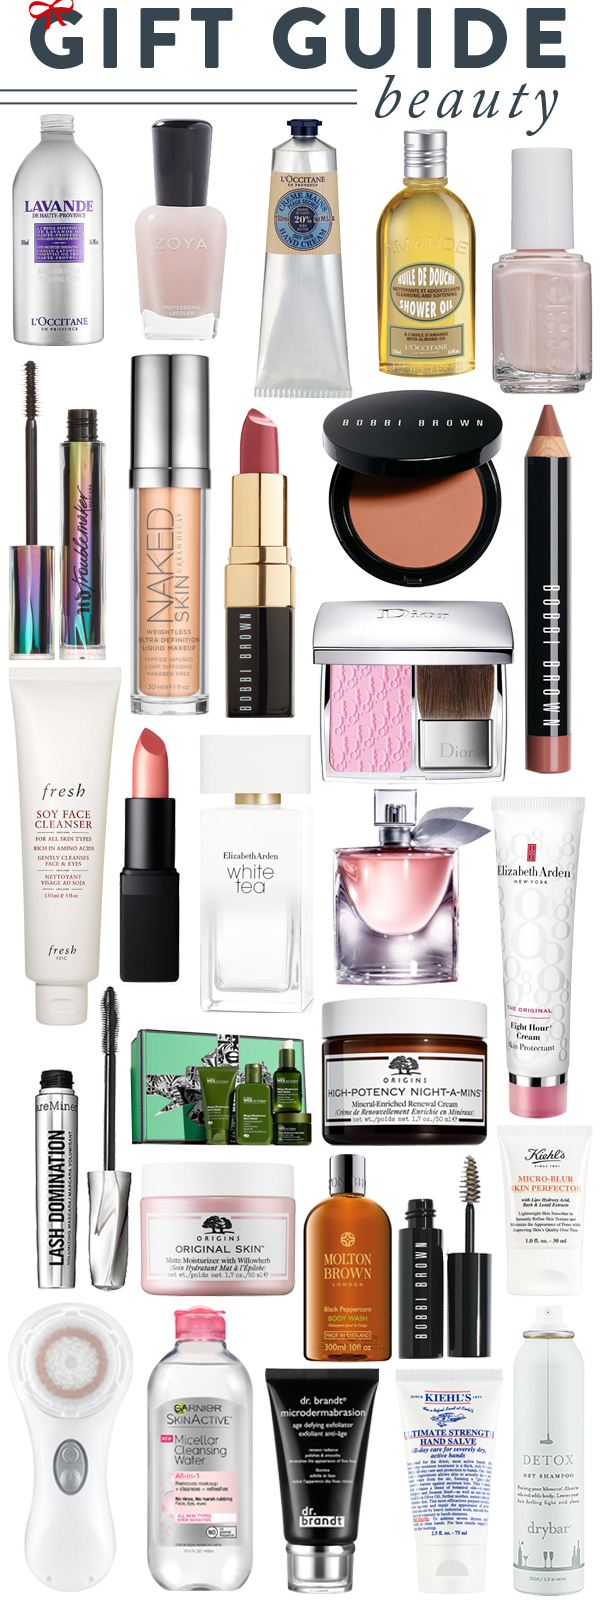 Beauty Products Gift Guide